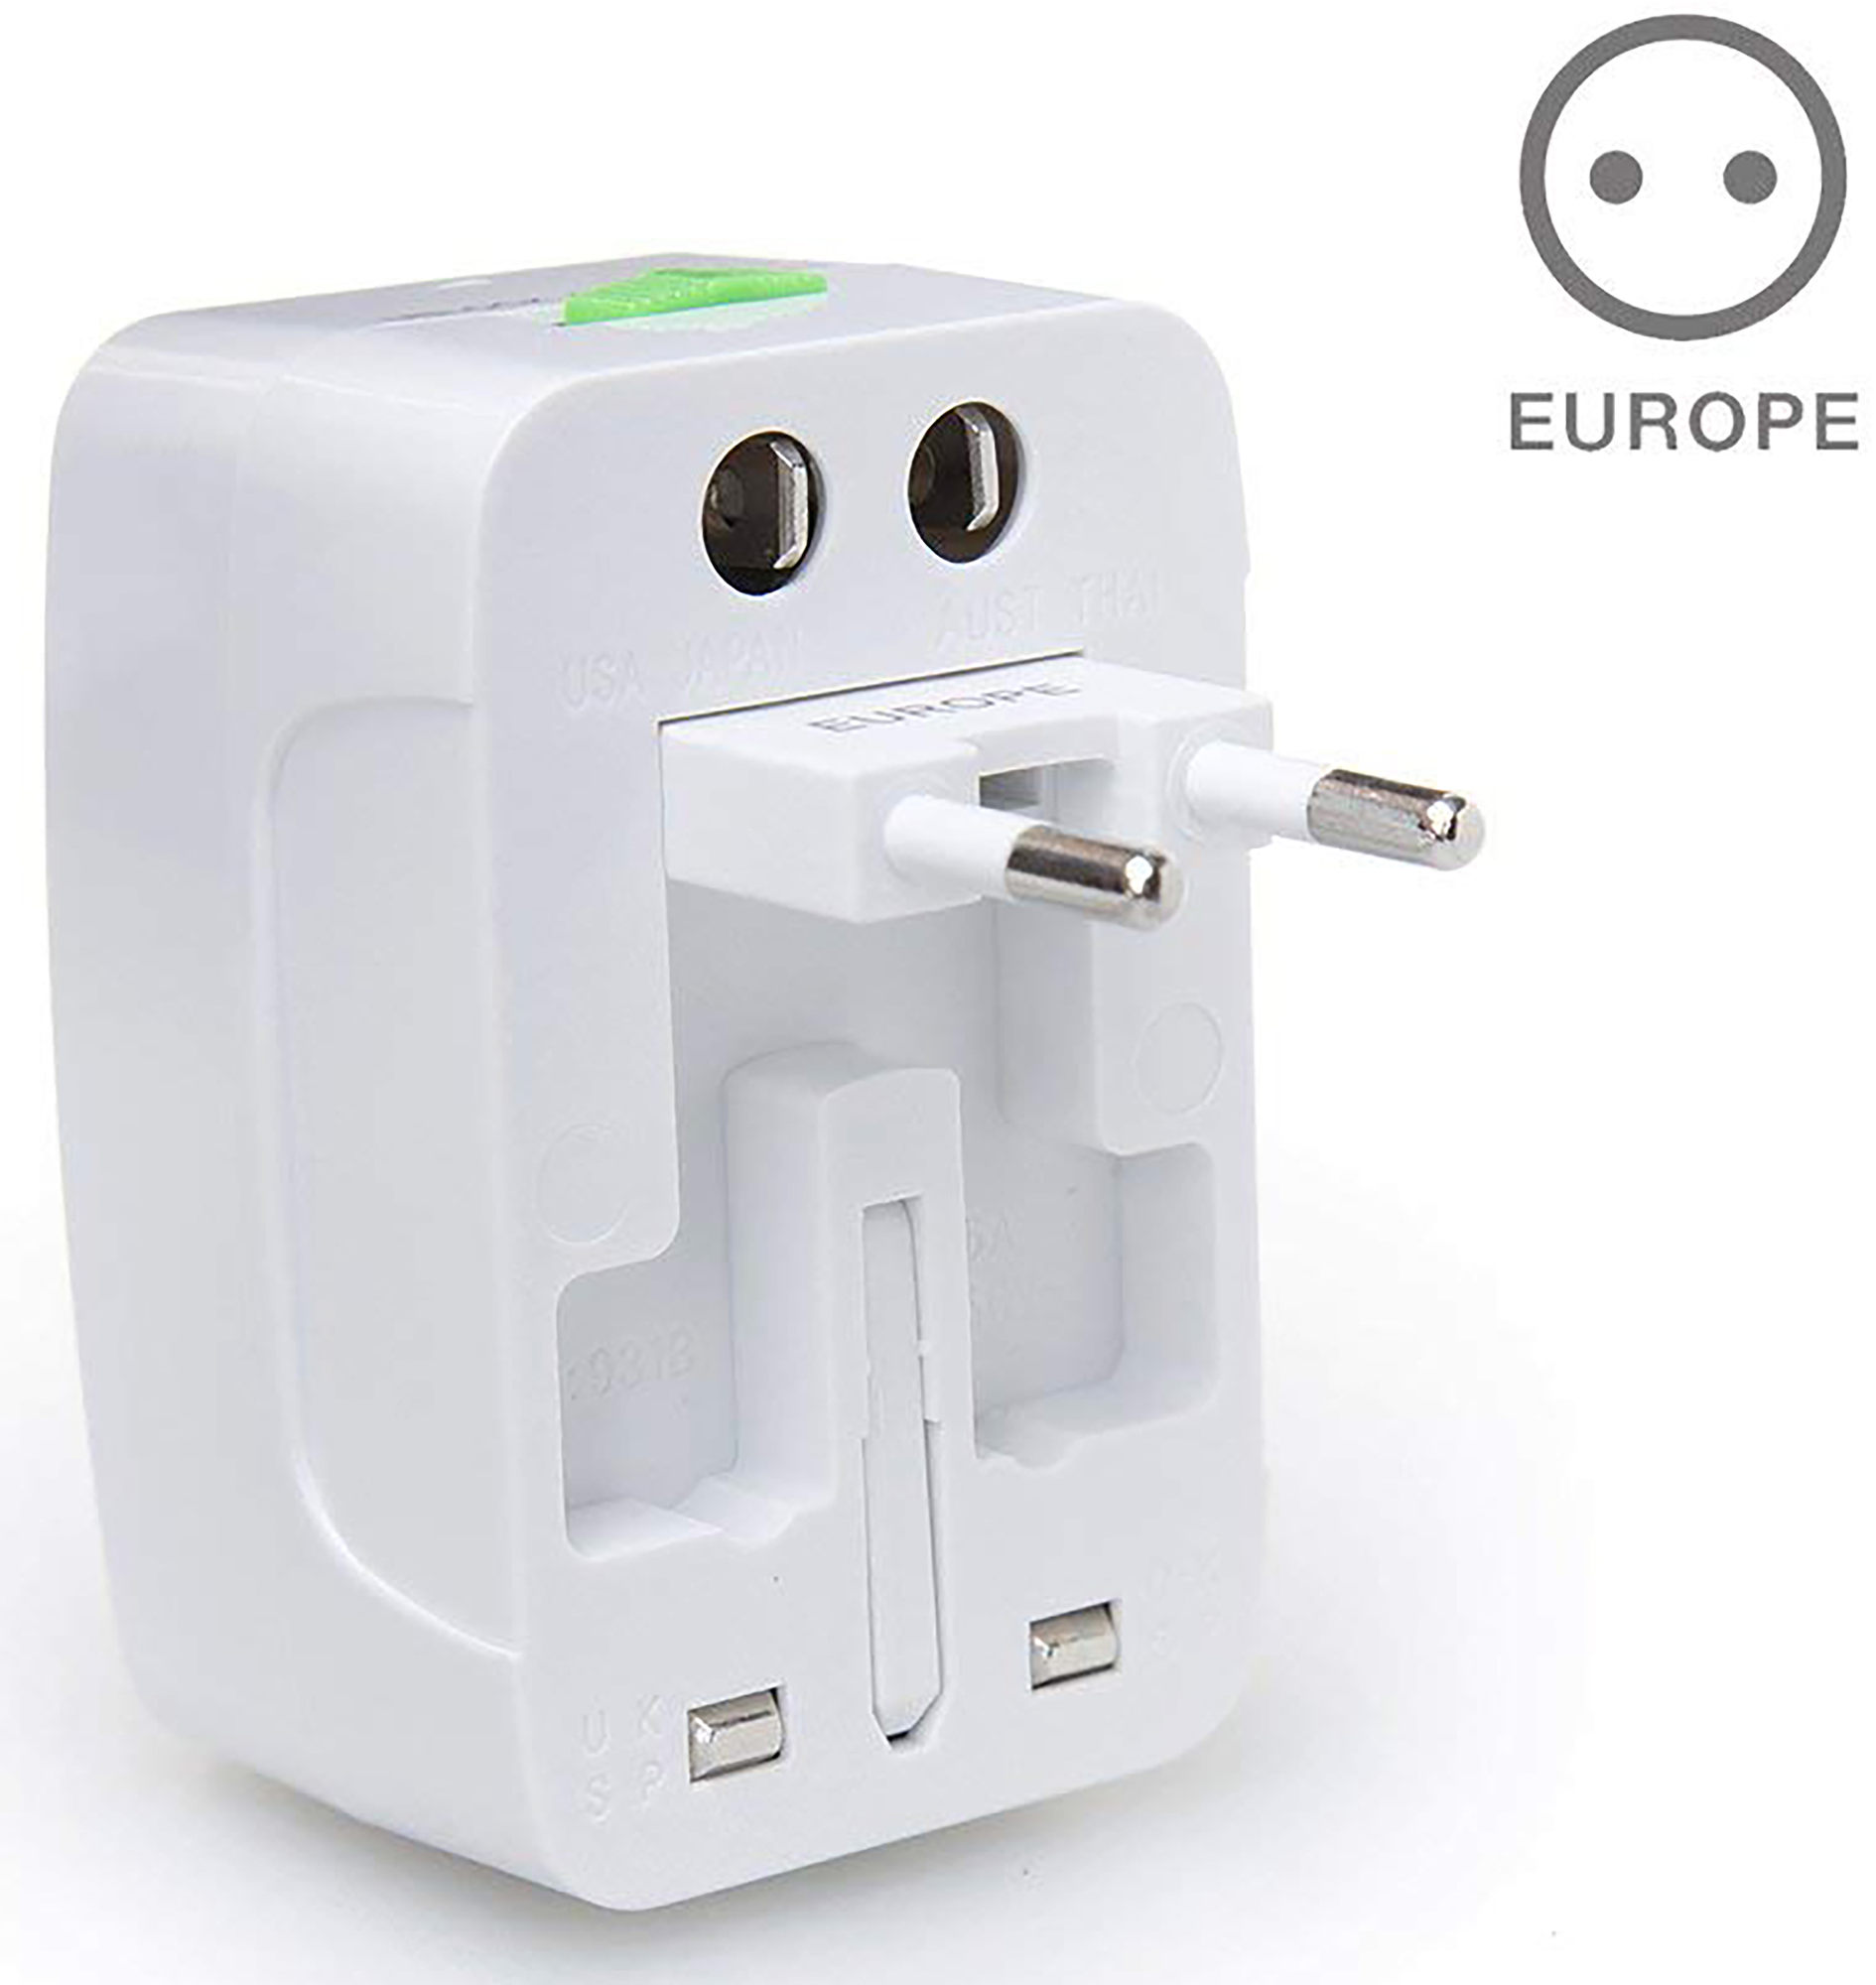 Adaptateur universel 150 pays